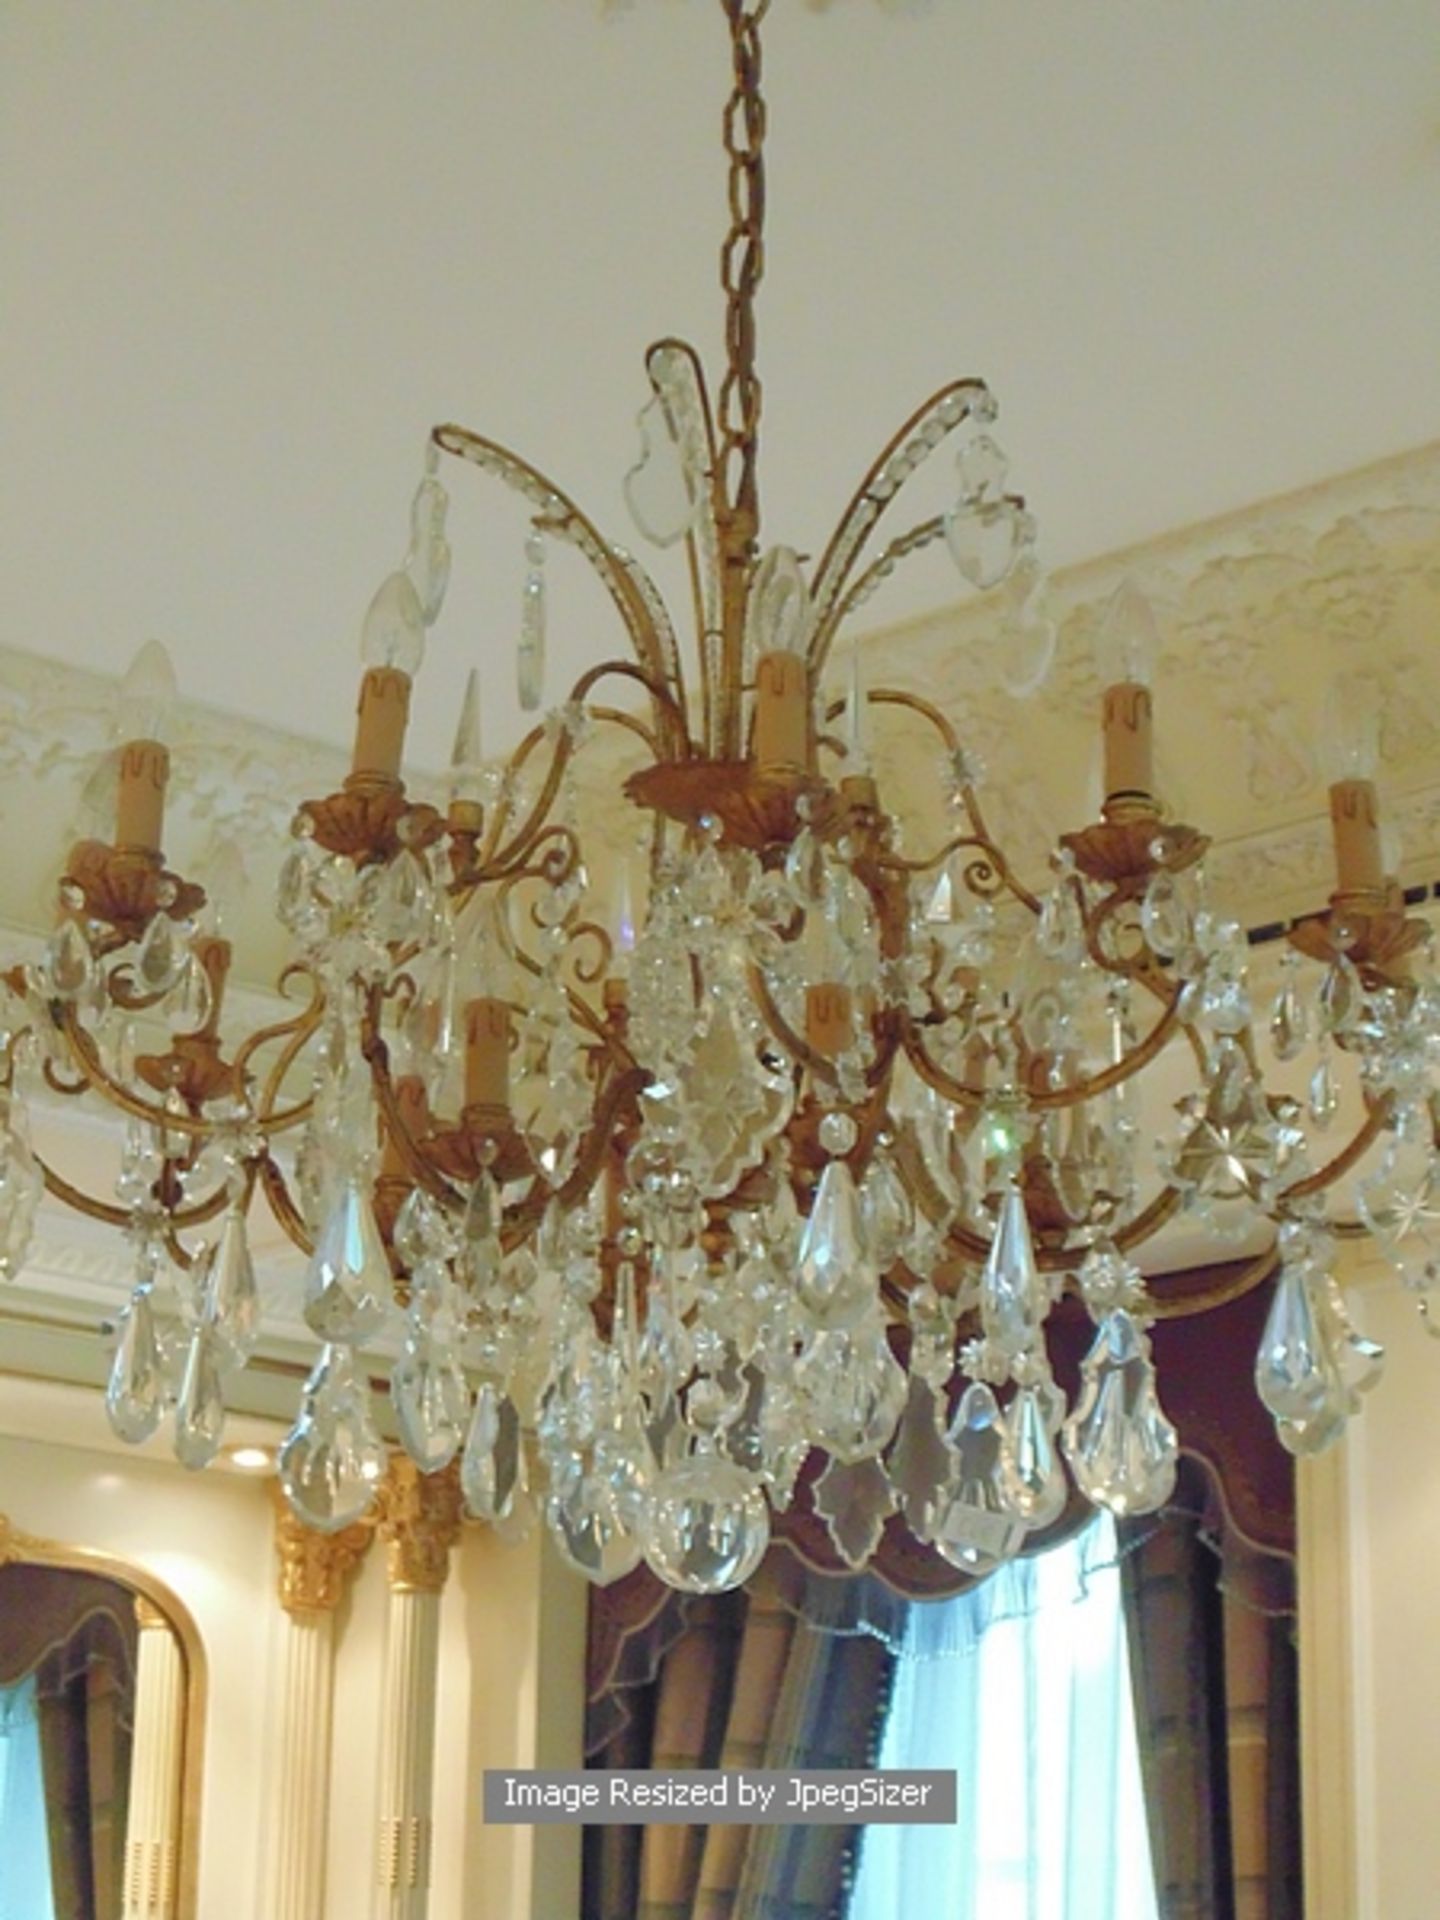 French bronze and crystal 18 arm chandelier 1250mm dropThe buyer to remove at own costs or appoint